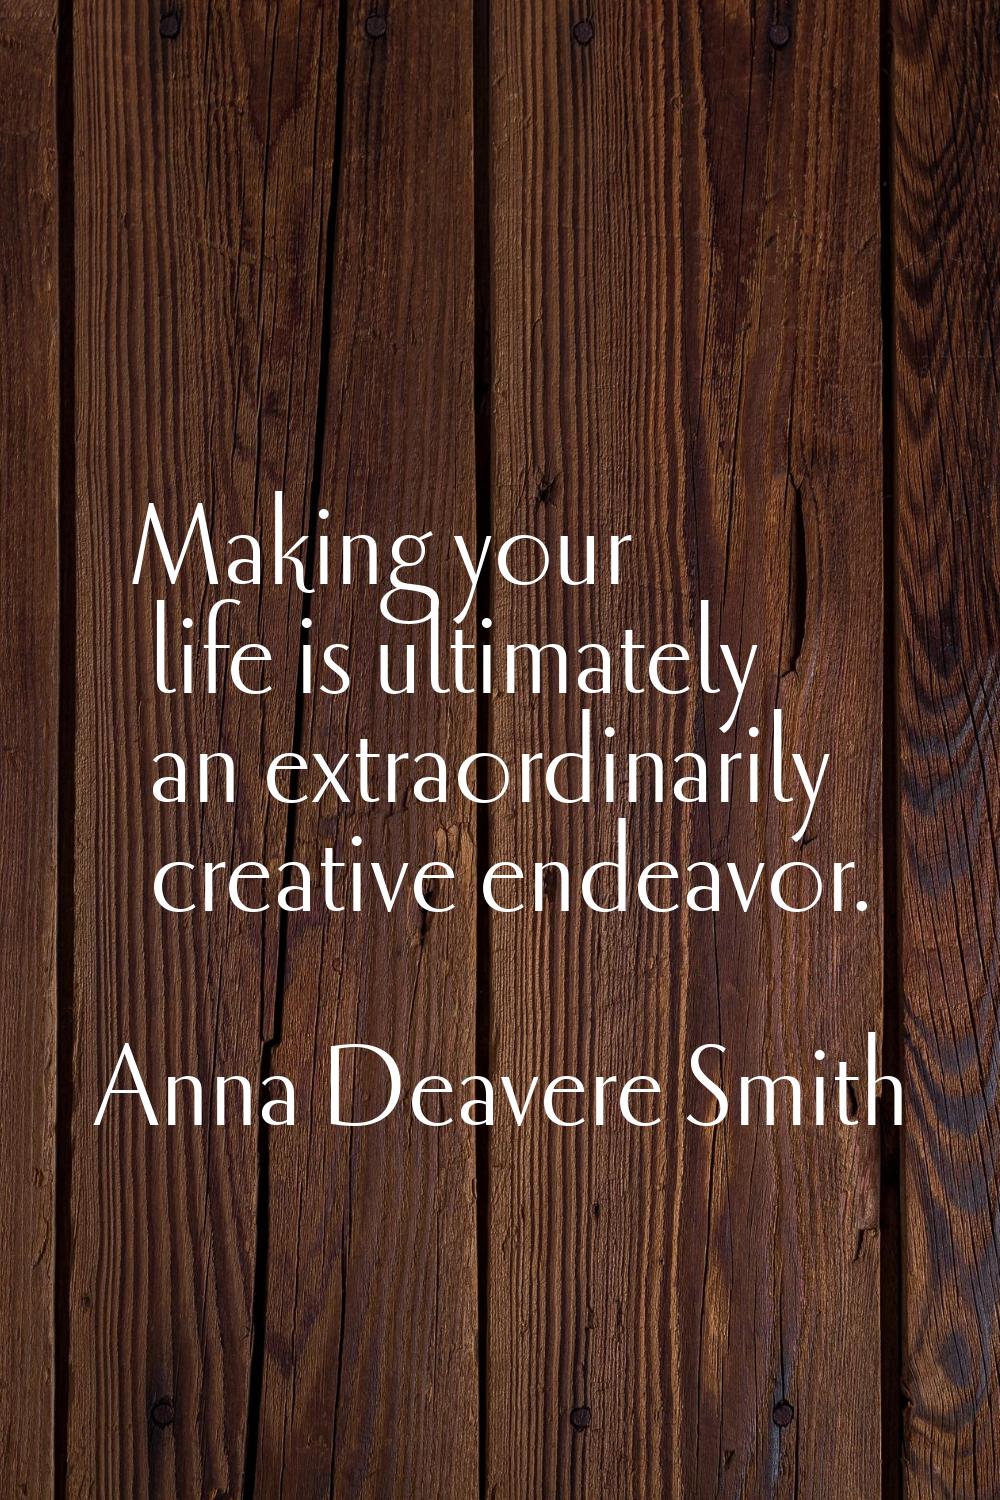 Making your life is ultimately an extraordinarily creative endeavor.